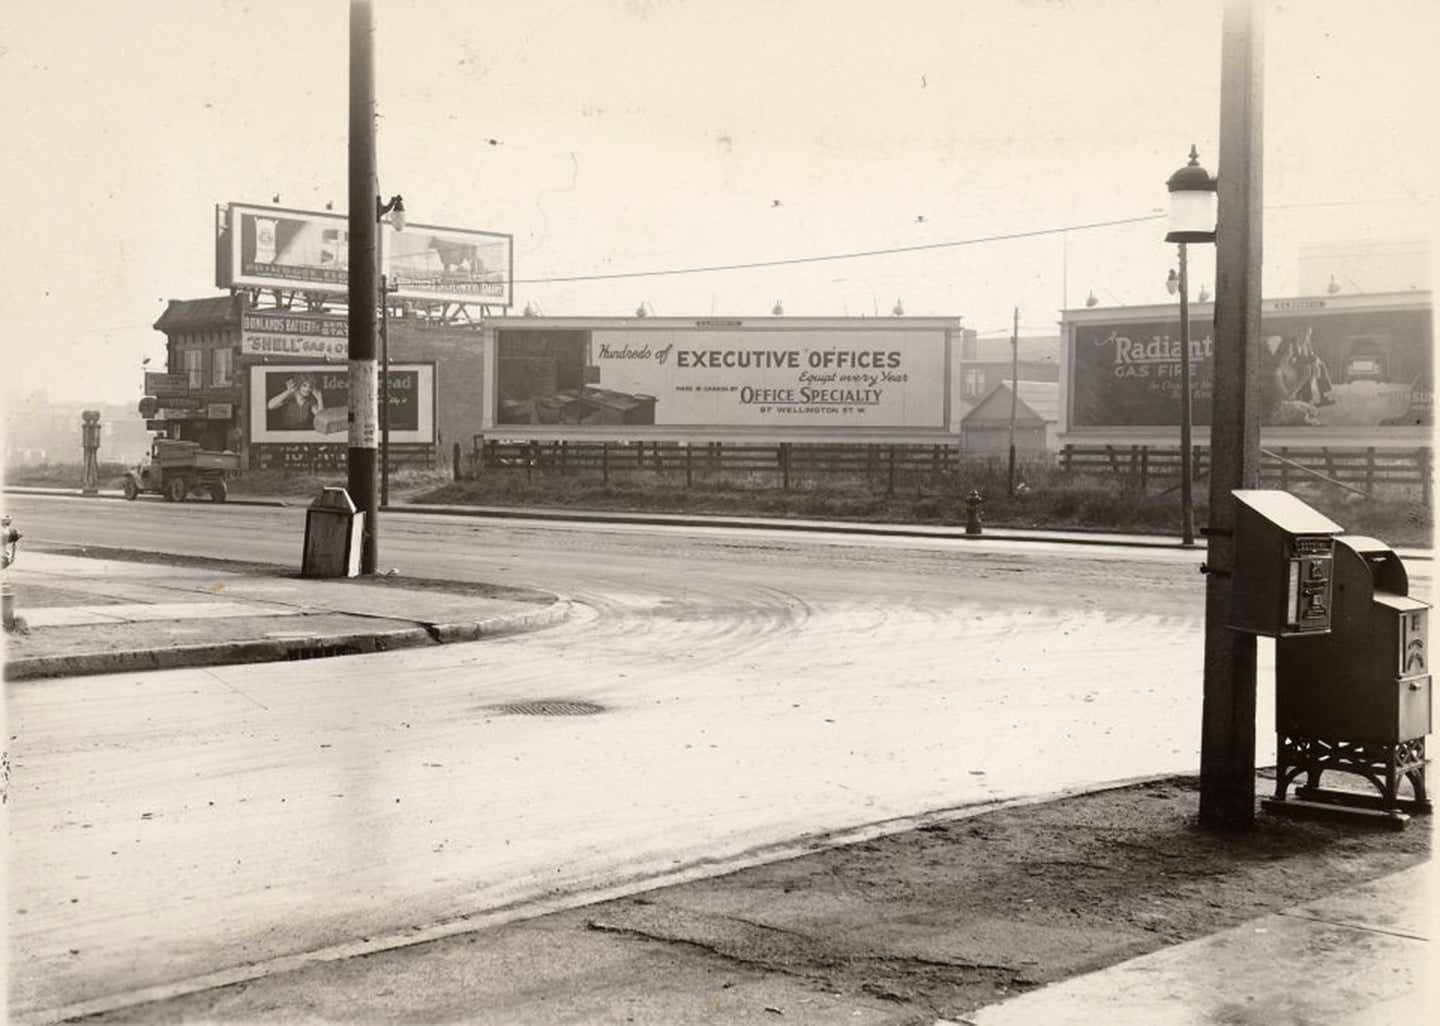 View looking south east from the north west corner of Danforth Ave. & Donlands Ave. intersection, 1920s